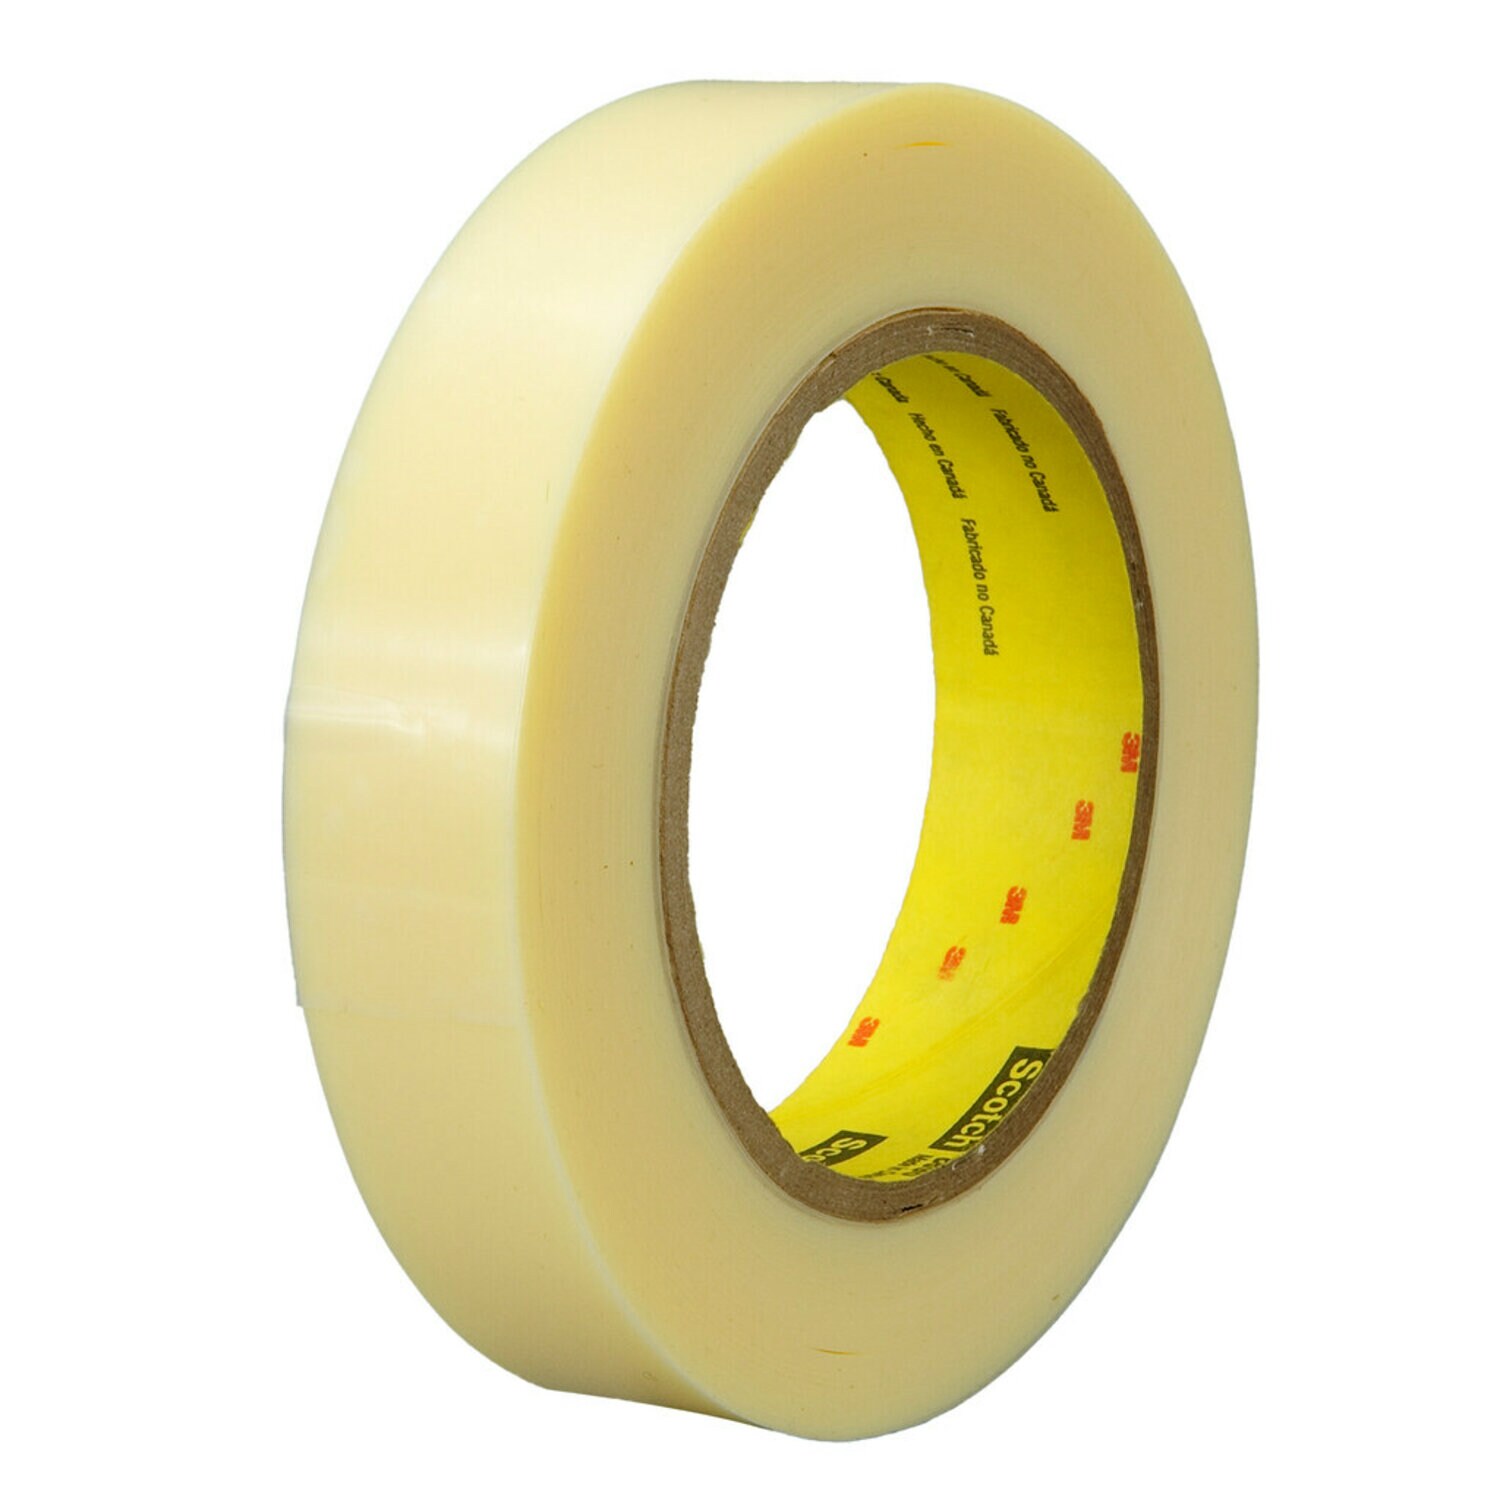 7000123952 - Scotch Strapping Tape 8898, Ivory, 24 mm x 55 m, 4.6 mil, 36 rolls per
case